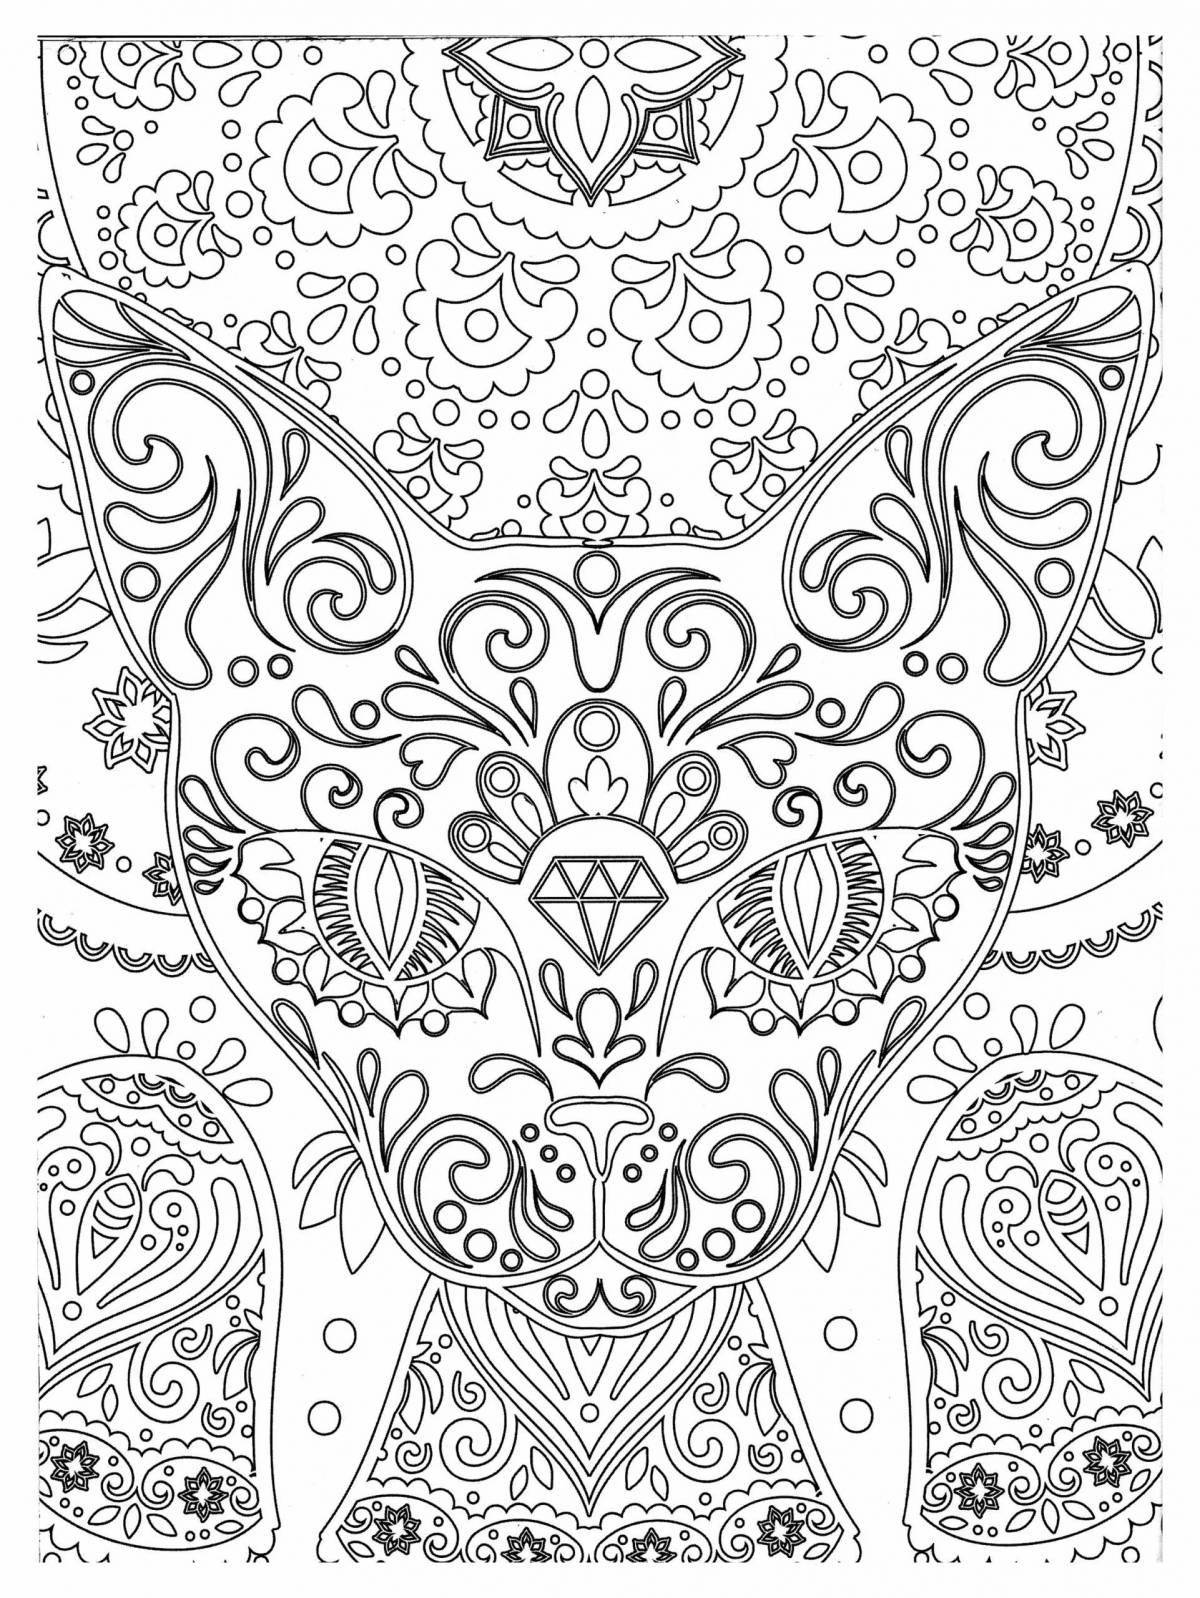 Fairy coloring book for adults